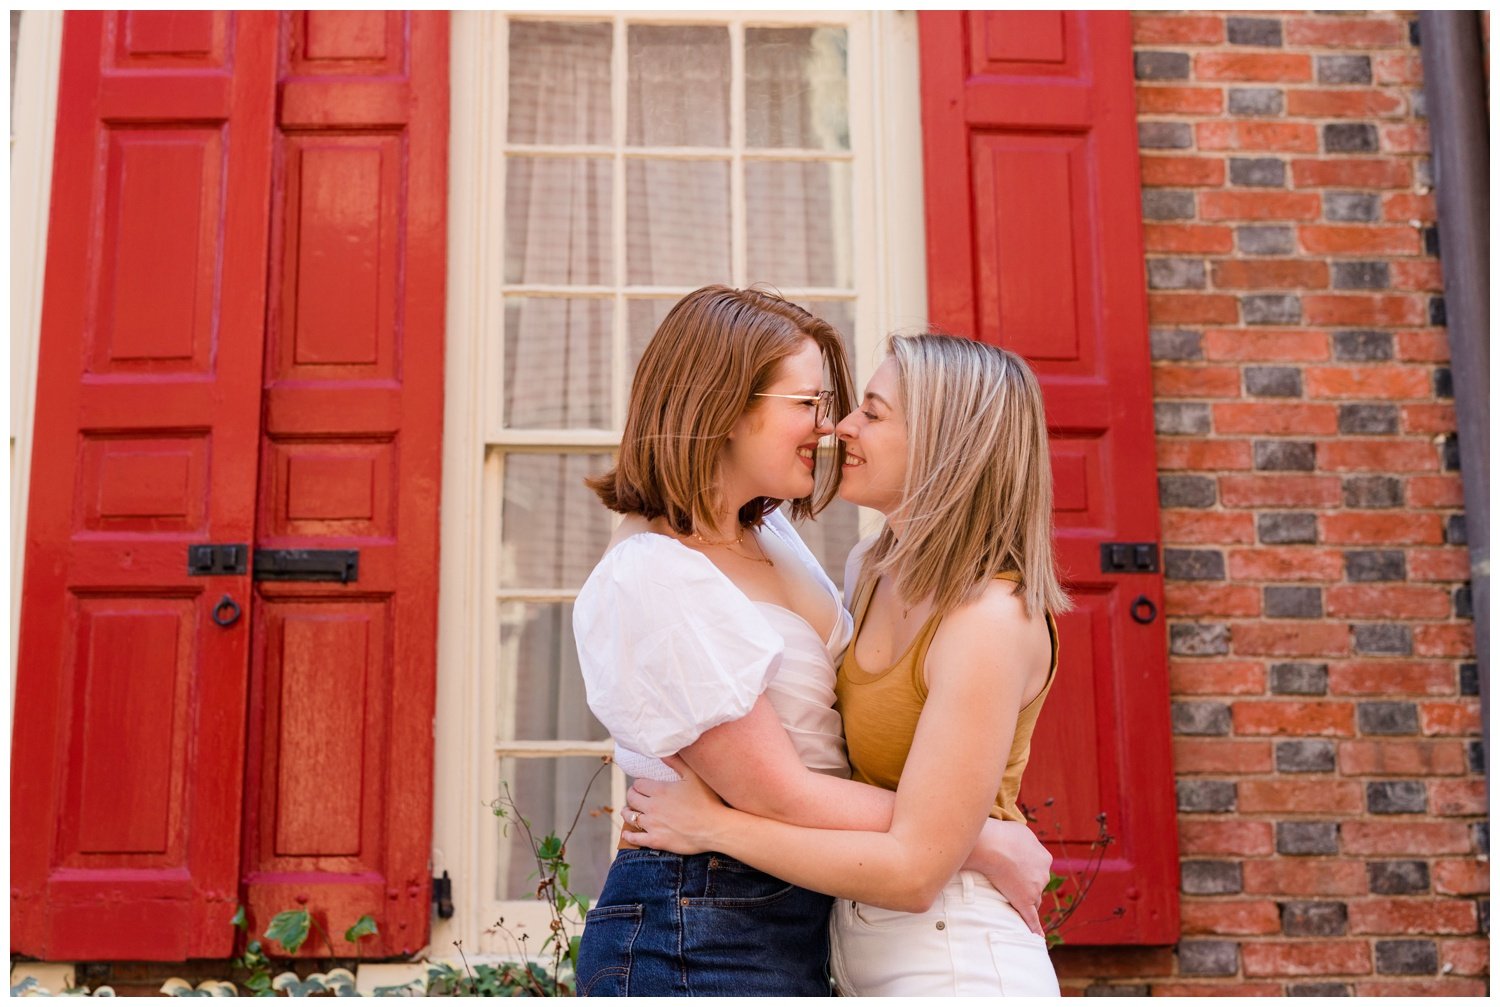 Lesbian-Old-City-Philly-Engagement-Photographer-LGBTQ-6.jpg